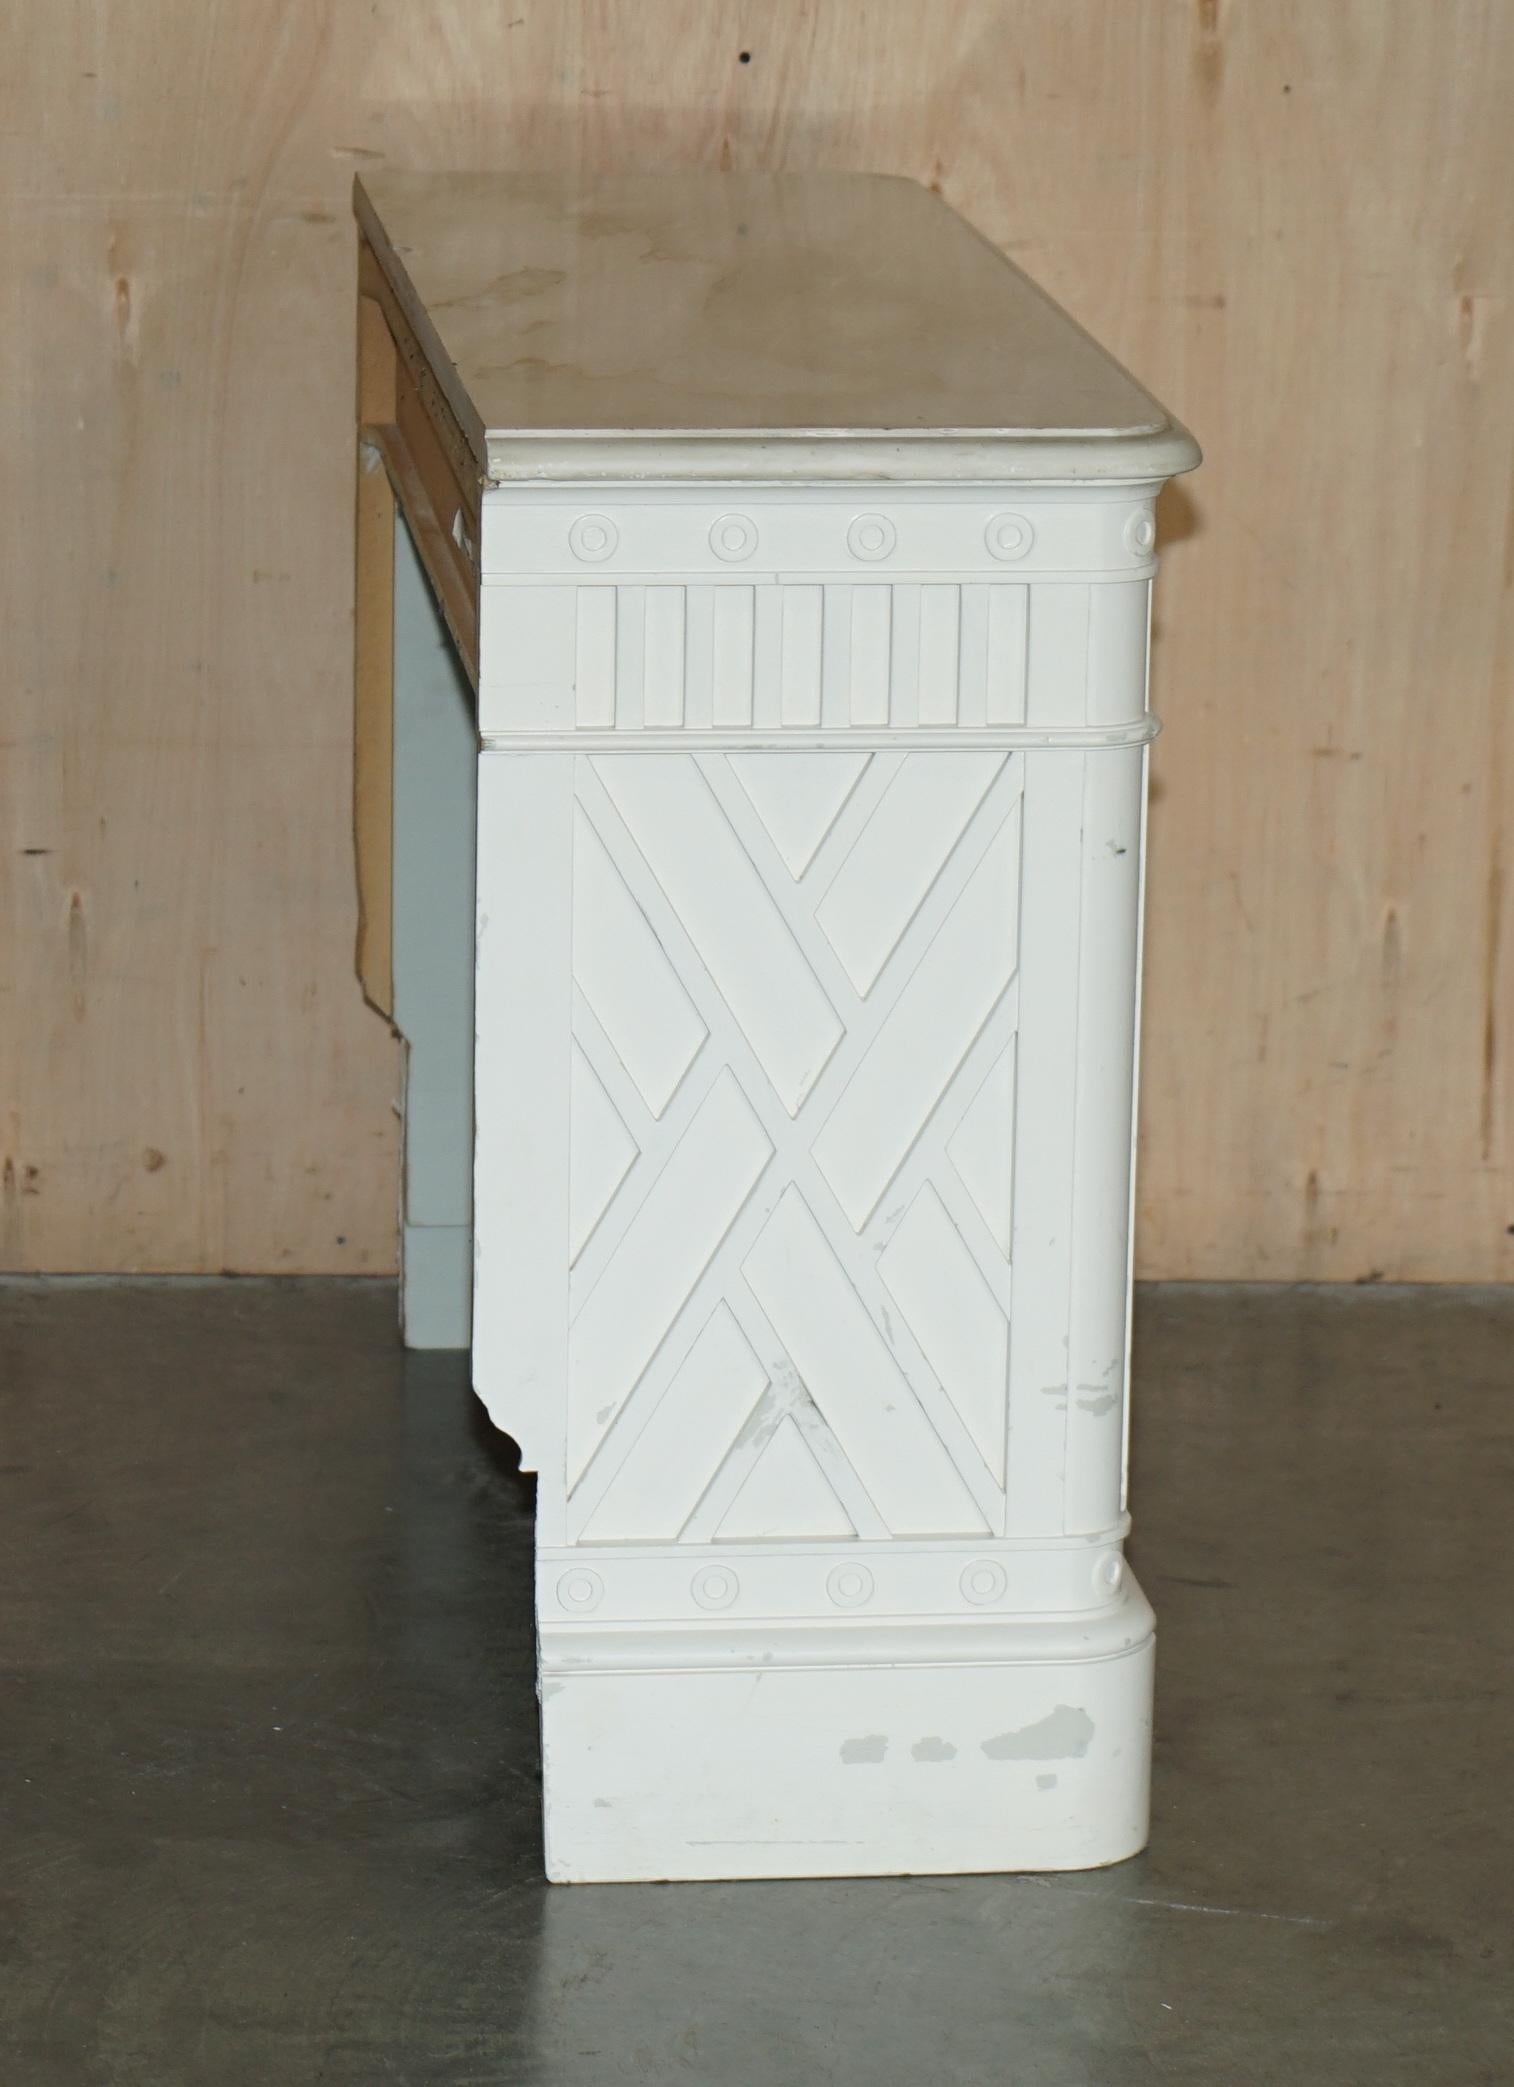 PAIR OF ViNTAGE ITALIAN CARRARA MARBLE TOPPED RADIATOR COVERS REMOVABLE FRONTS For Sale 10